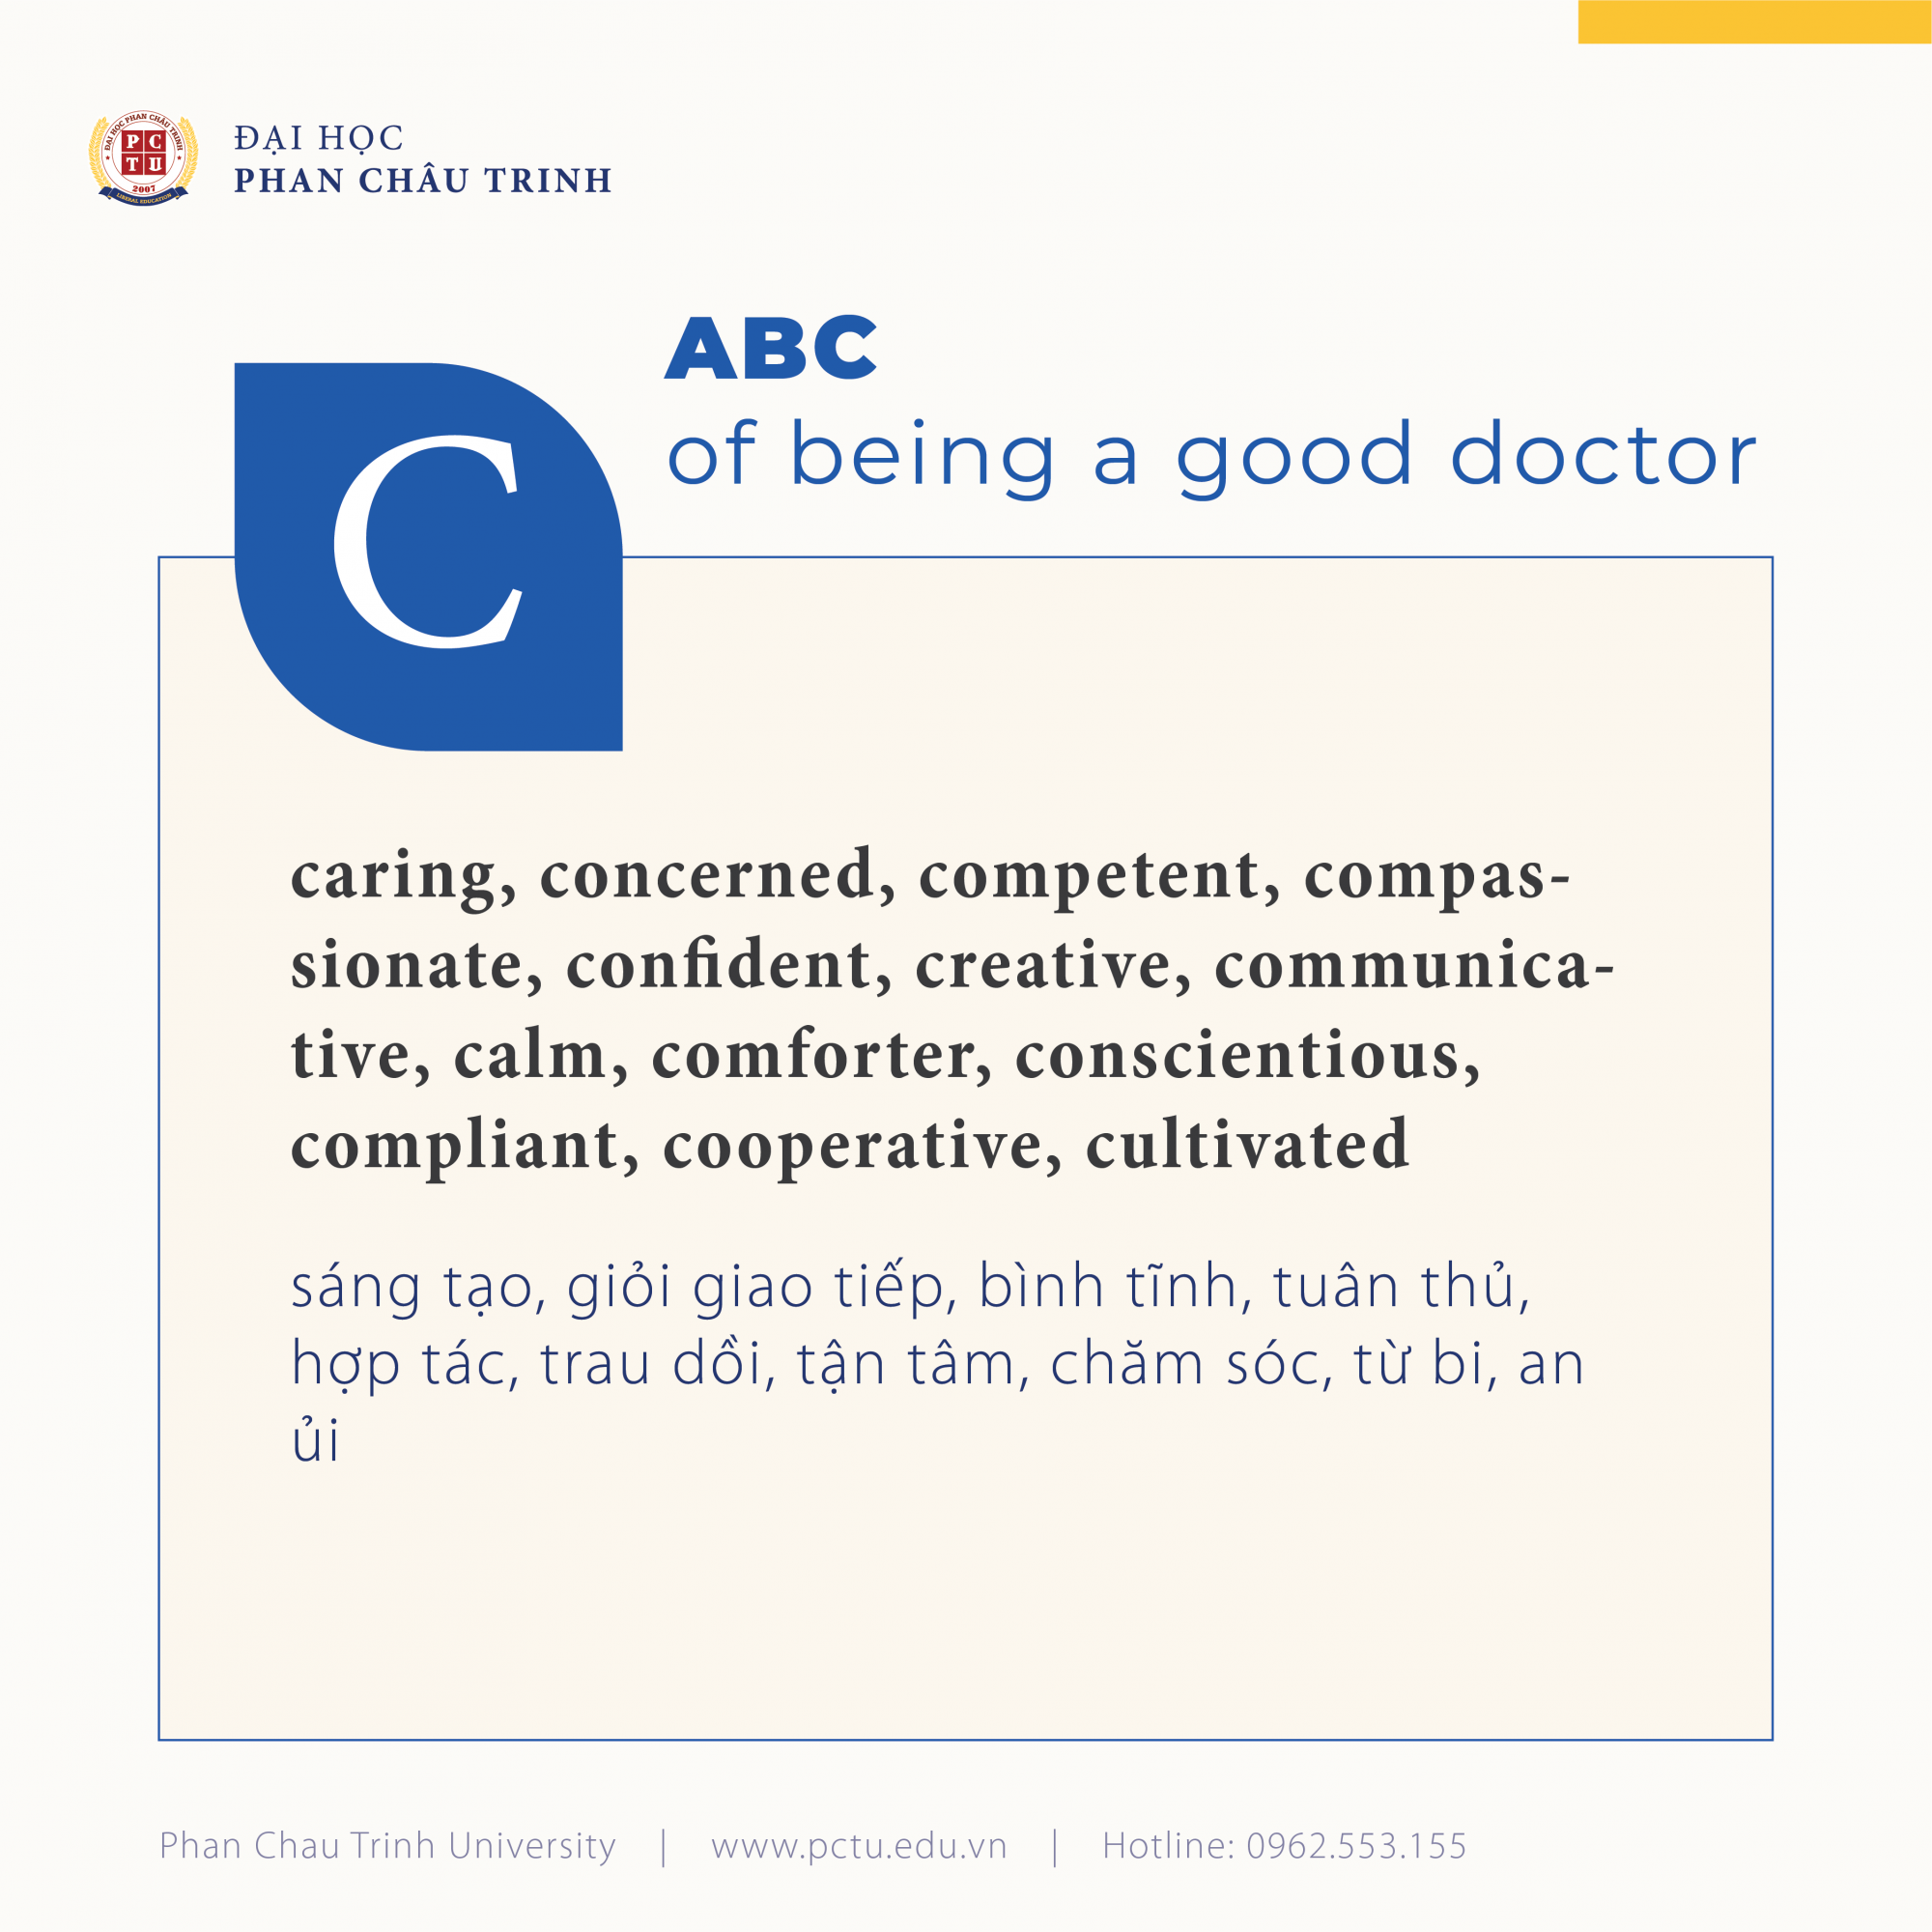 ABC_of_being_a_good_doctor-01